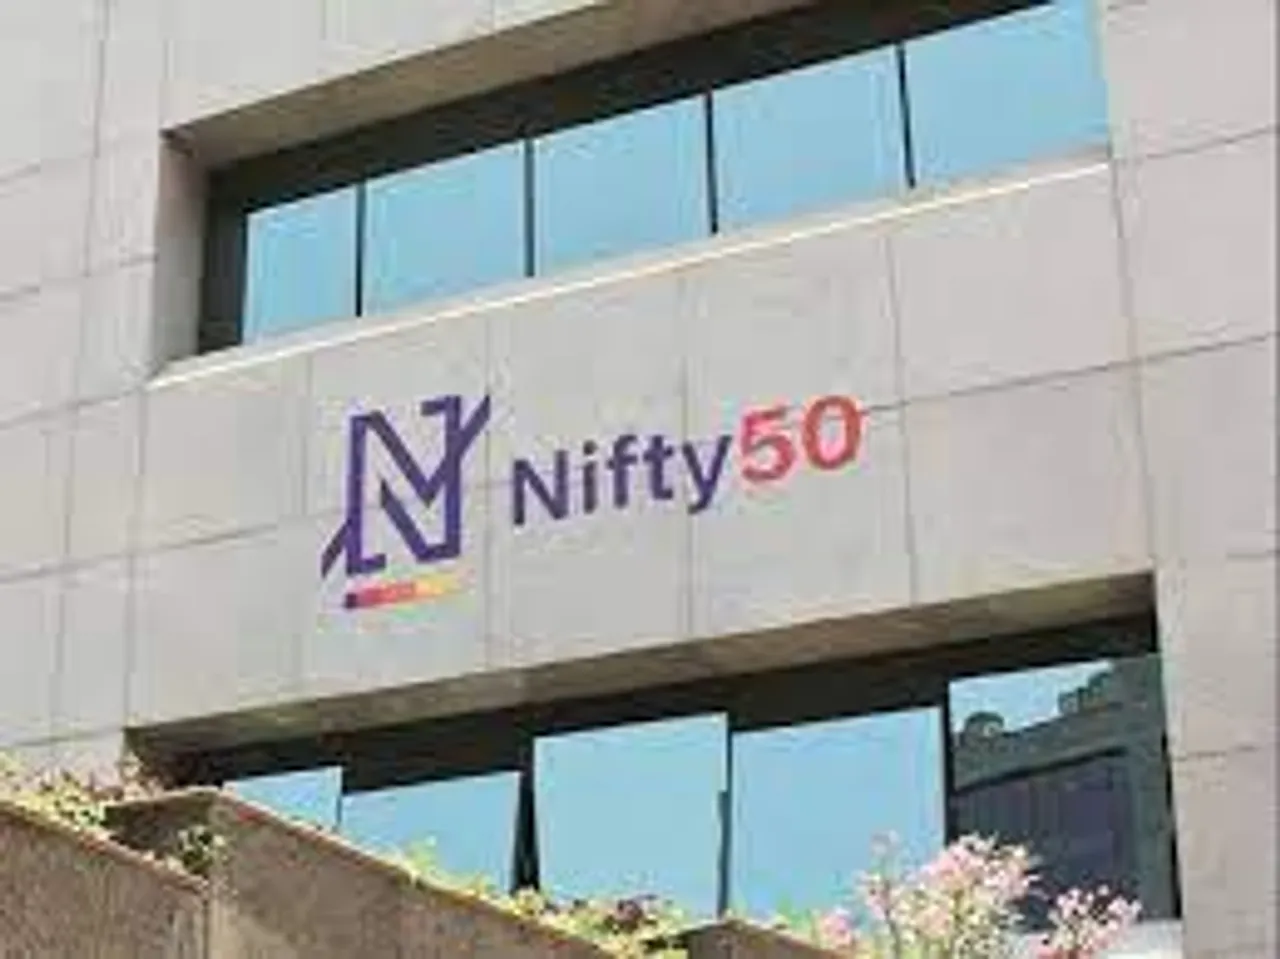 Highlights of announcements by select companies on stock exchanges NIFTY 50